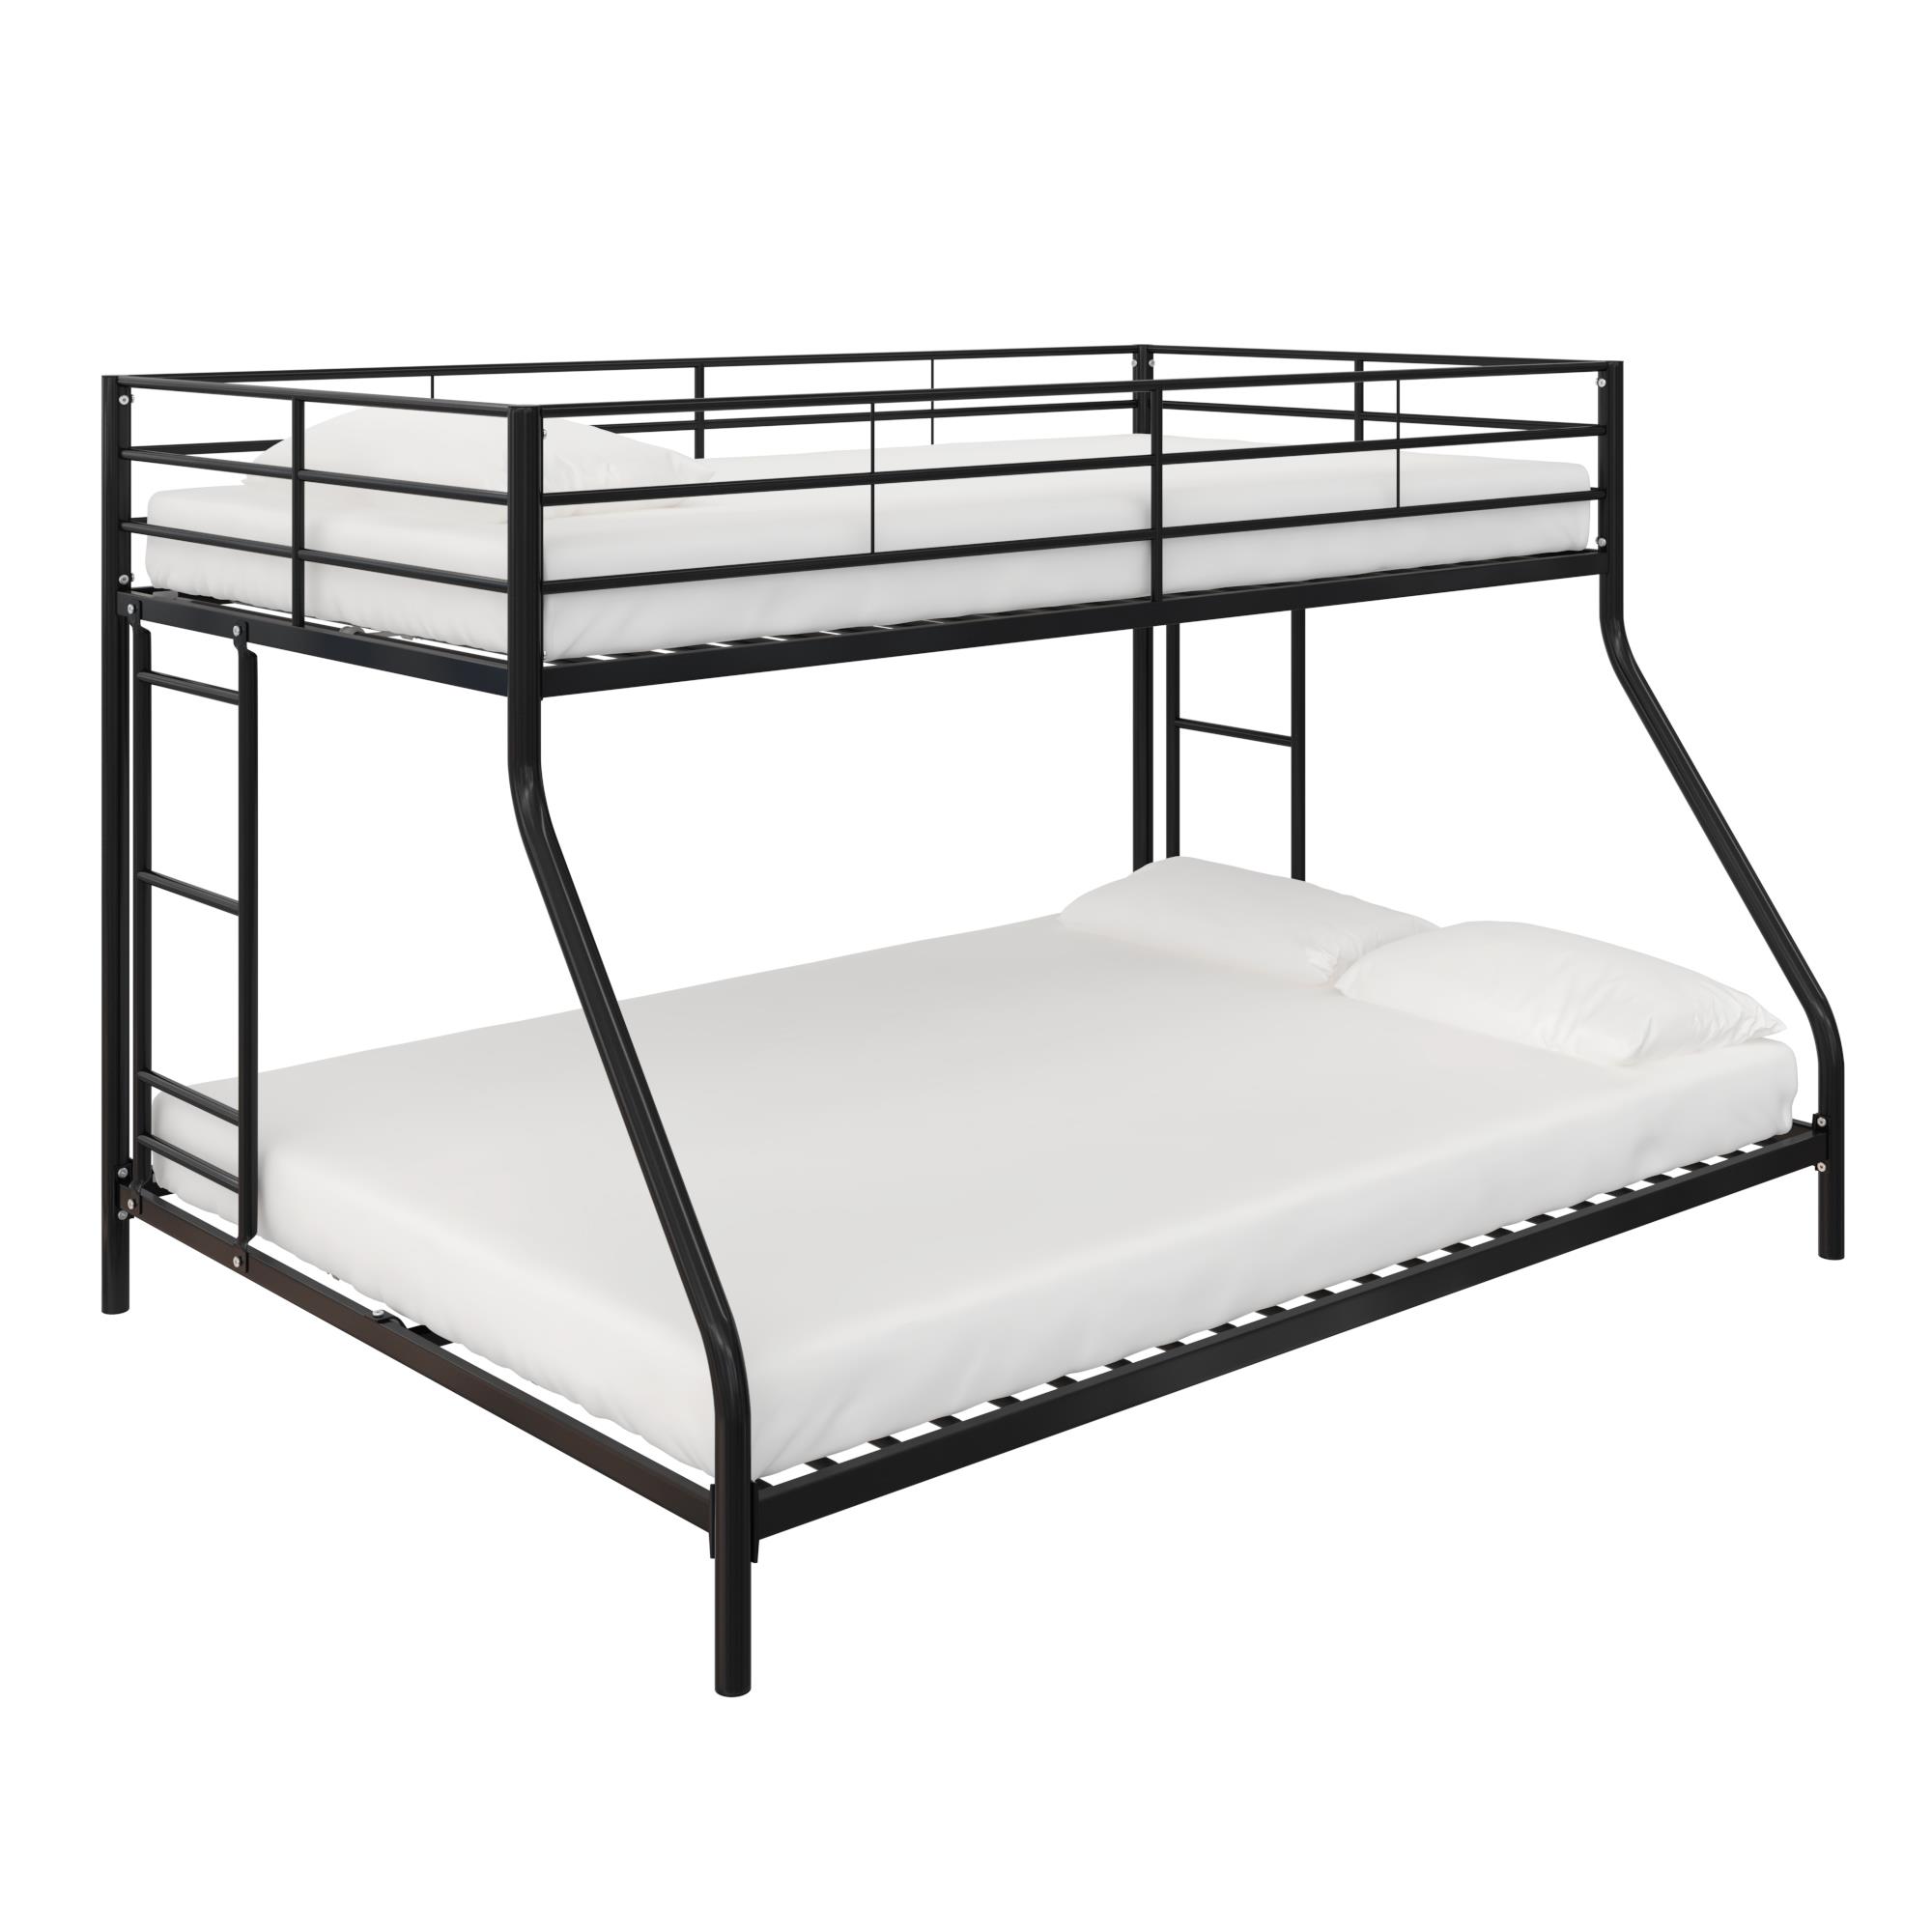 Space Junior Twin Over Full Bunk Bed, Mainstays Premium Twin Over Full Metal Bunk Bed Multiple Colors